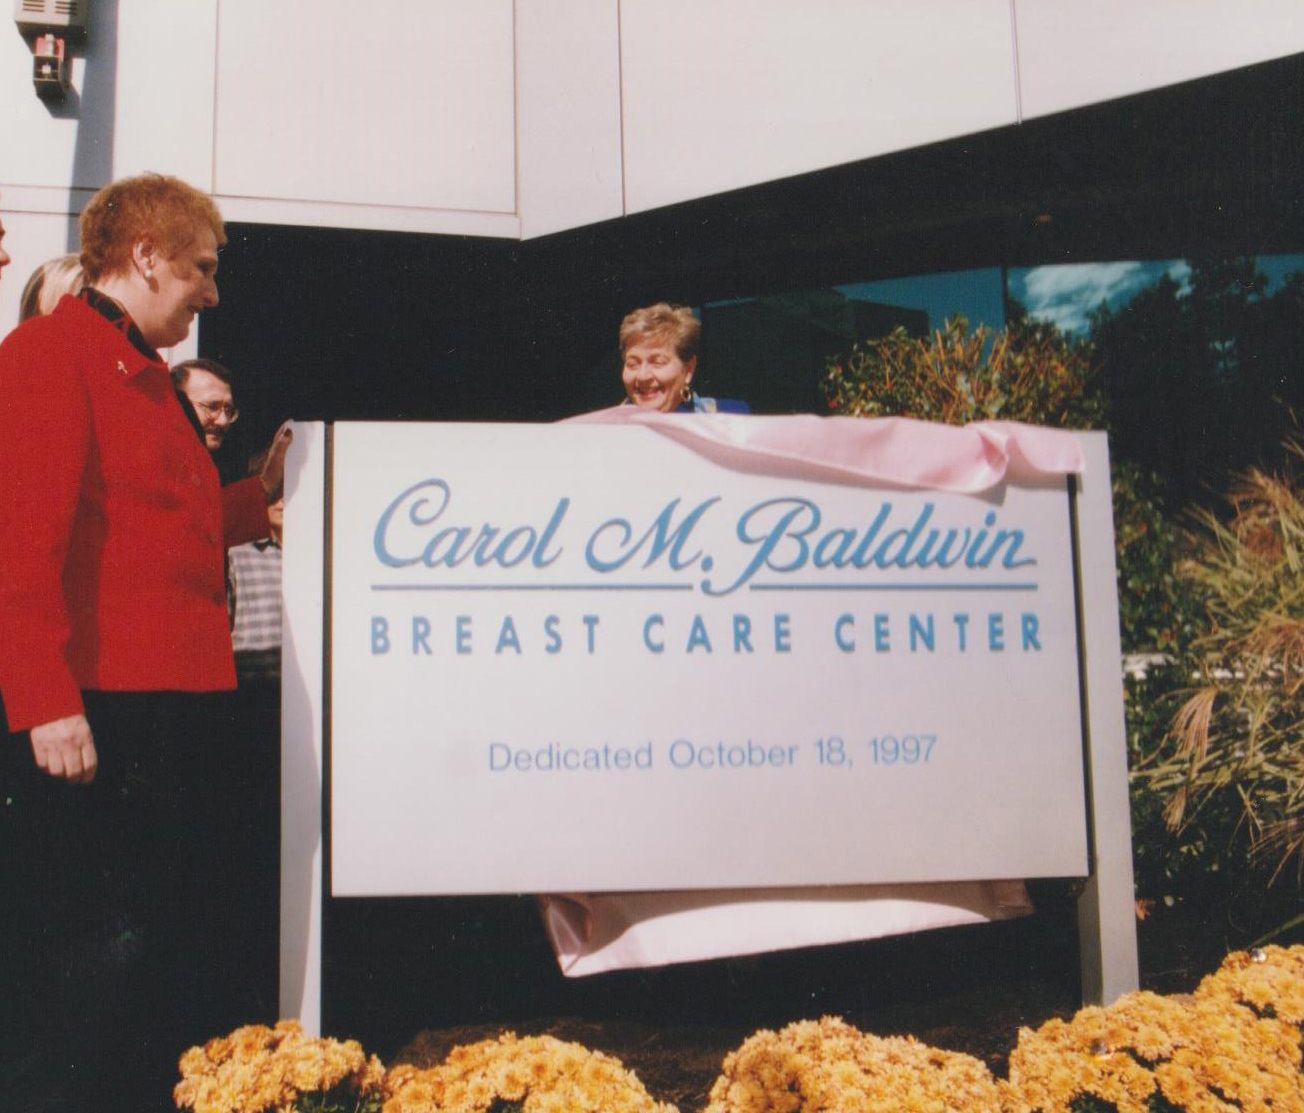 Opening Day of Carol M. Baldwin Breast Care Center in 1997